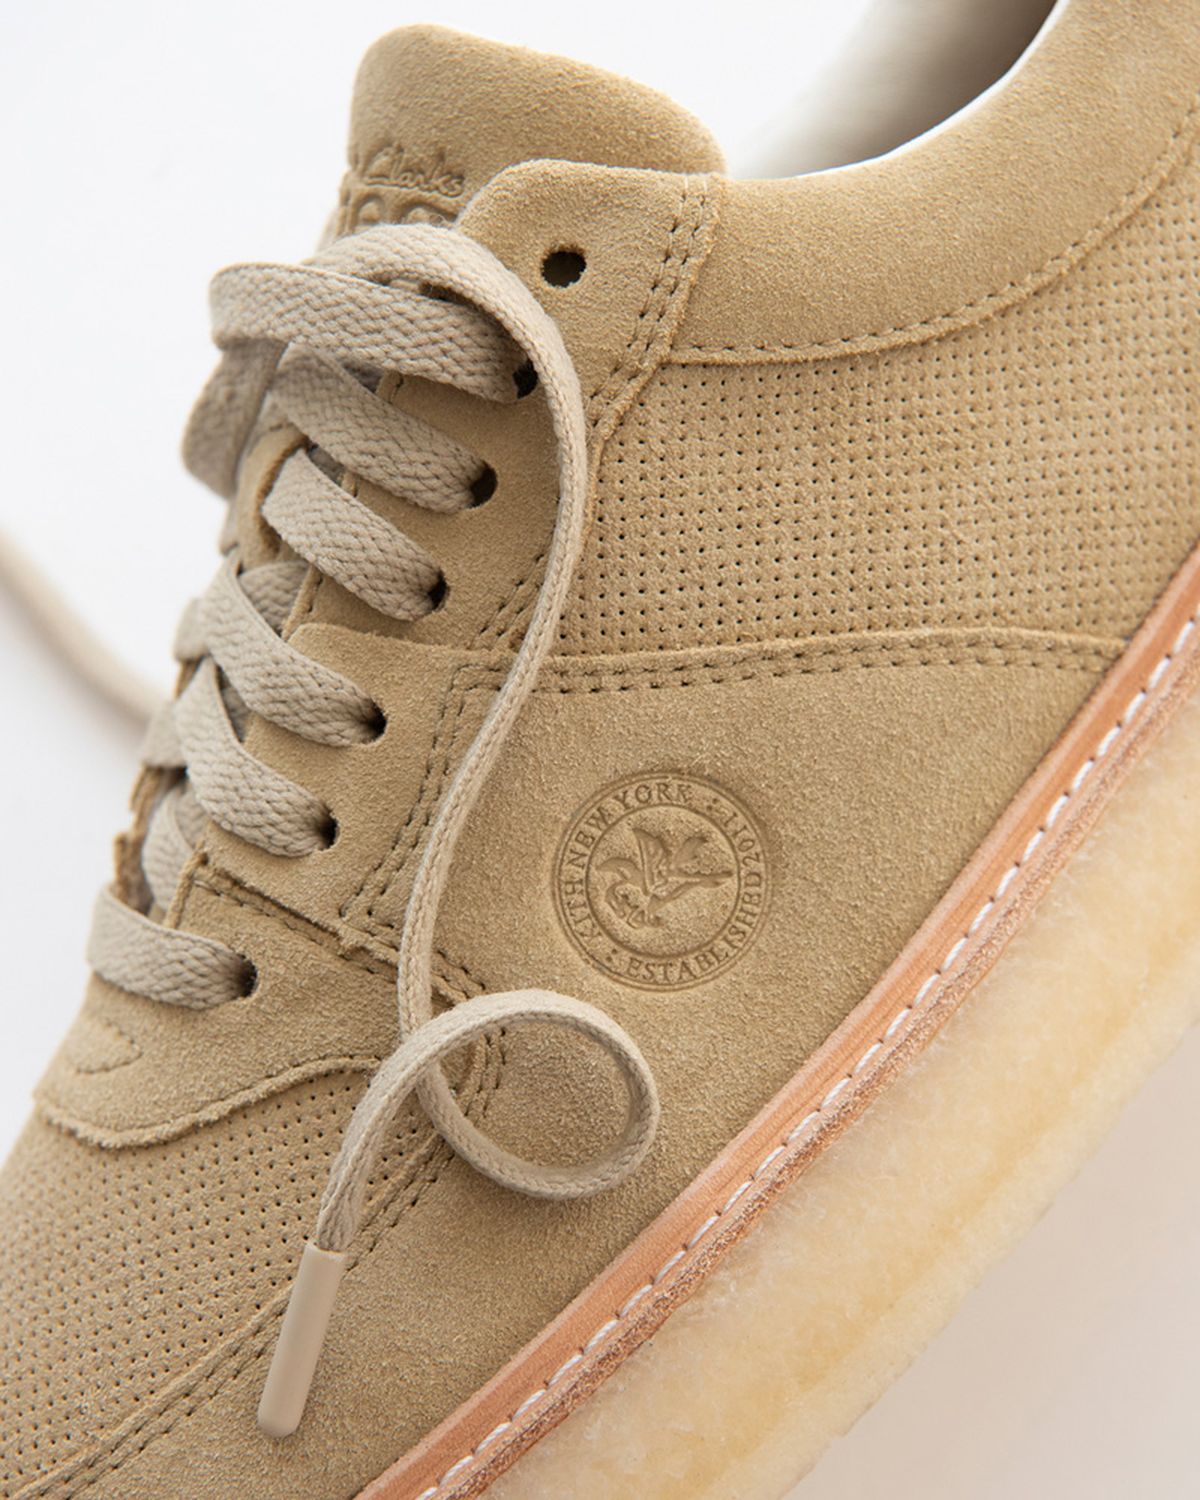 Ronnie Fieg x Clarks Originals 8th Street: Where to Buy Today